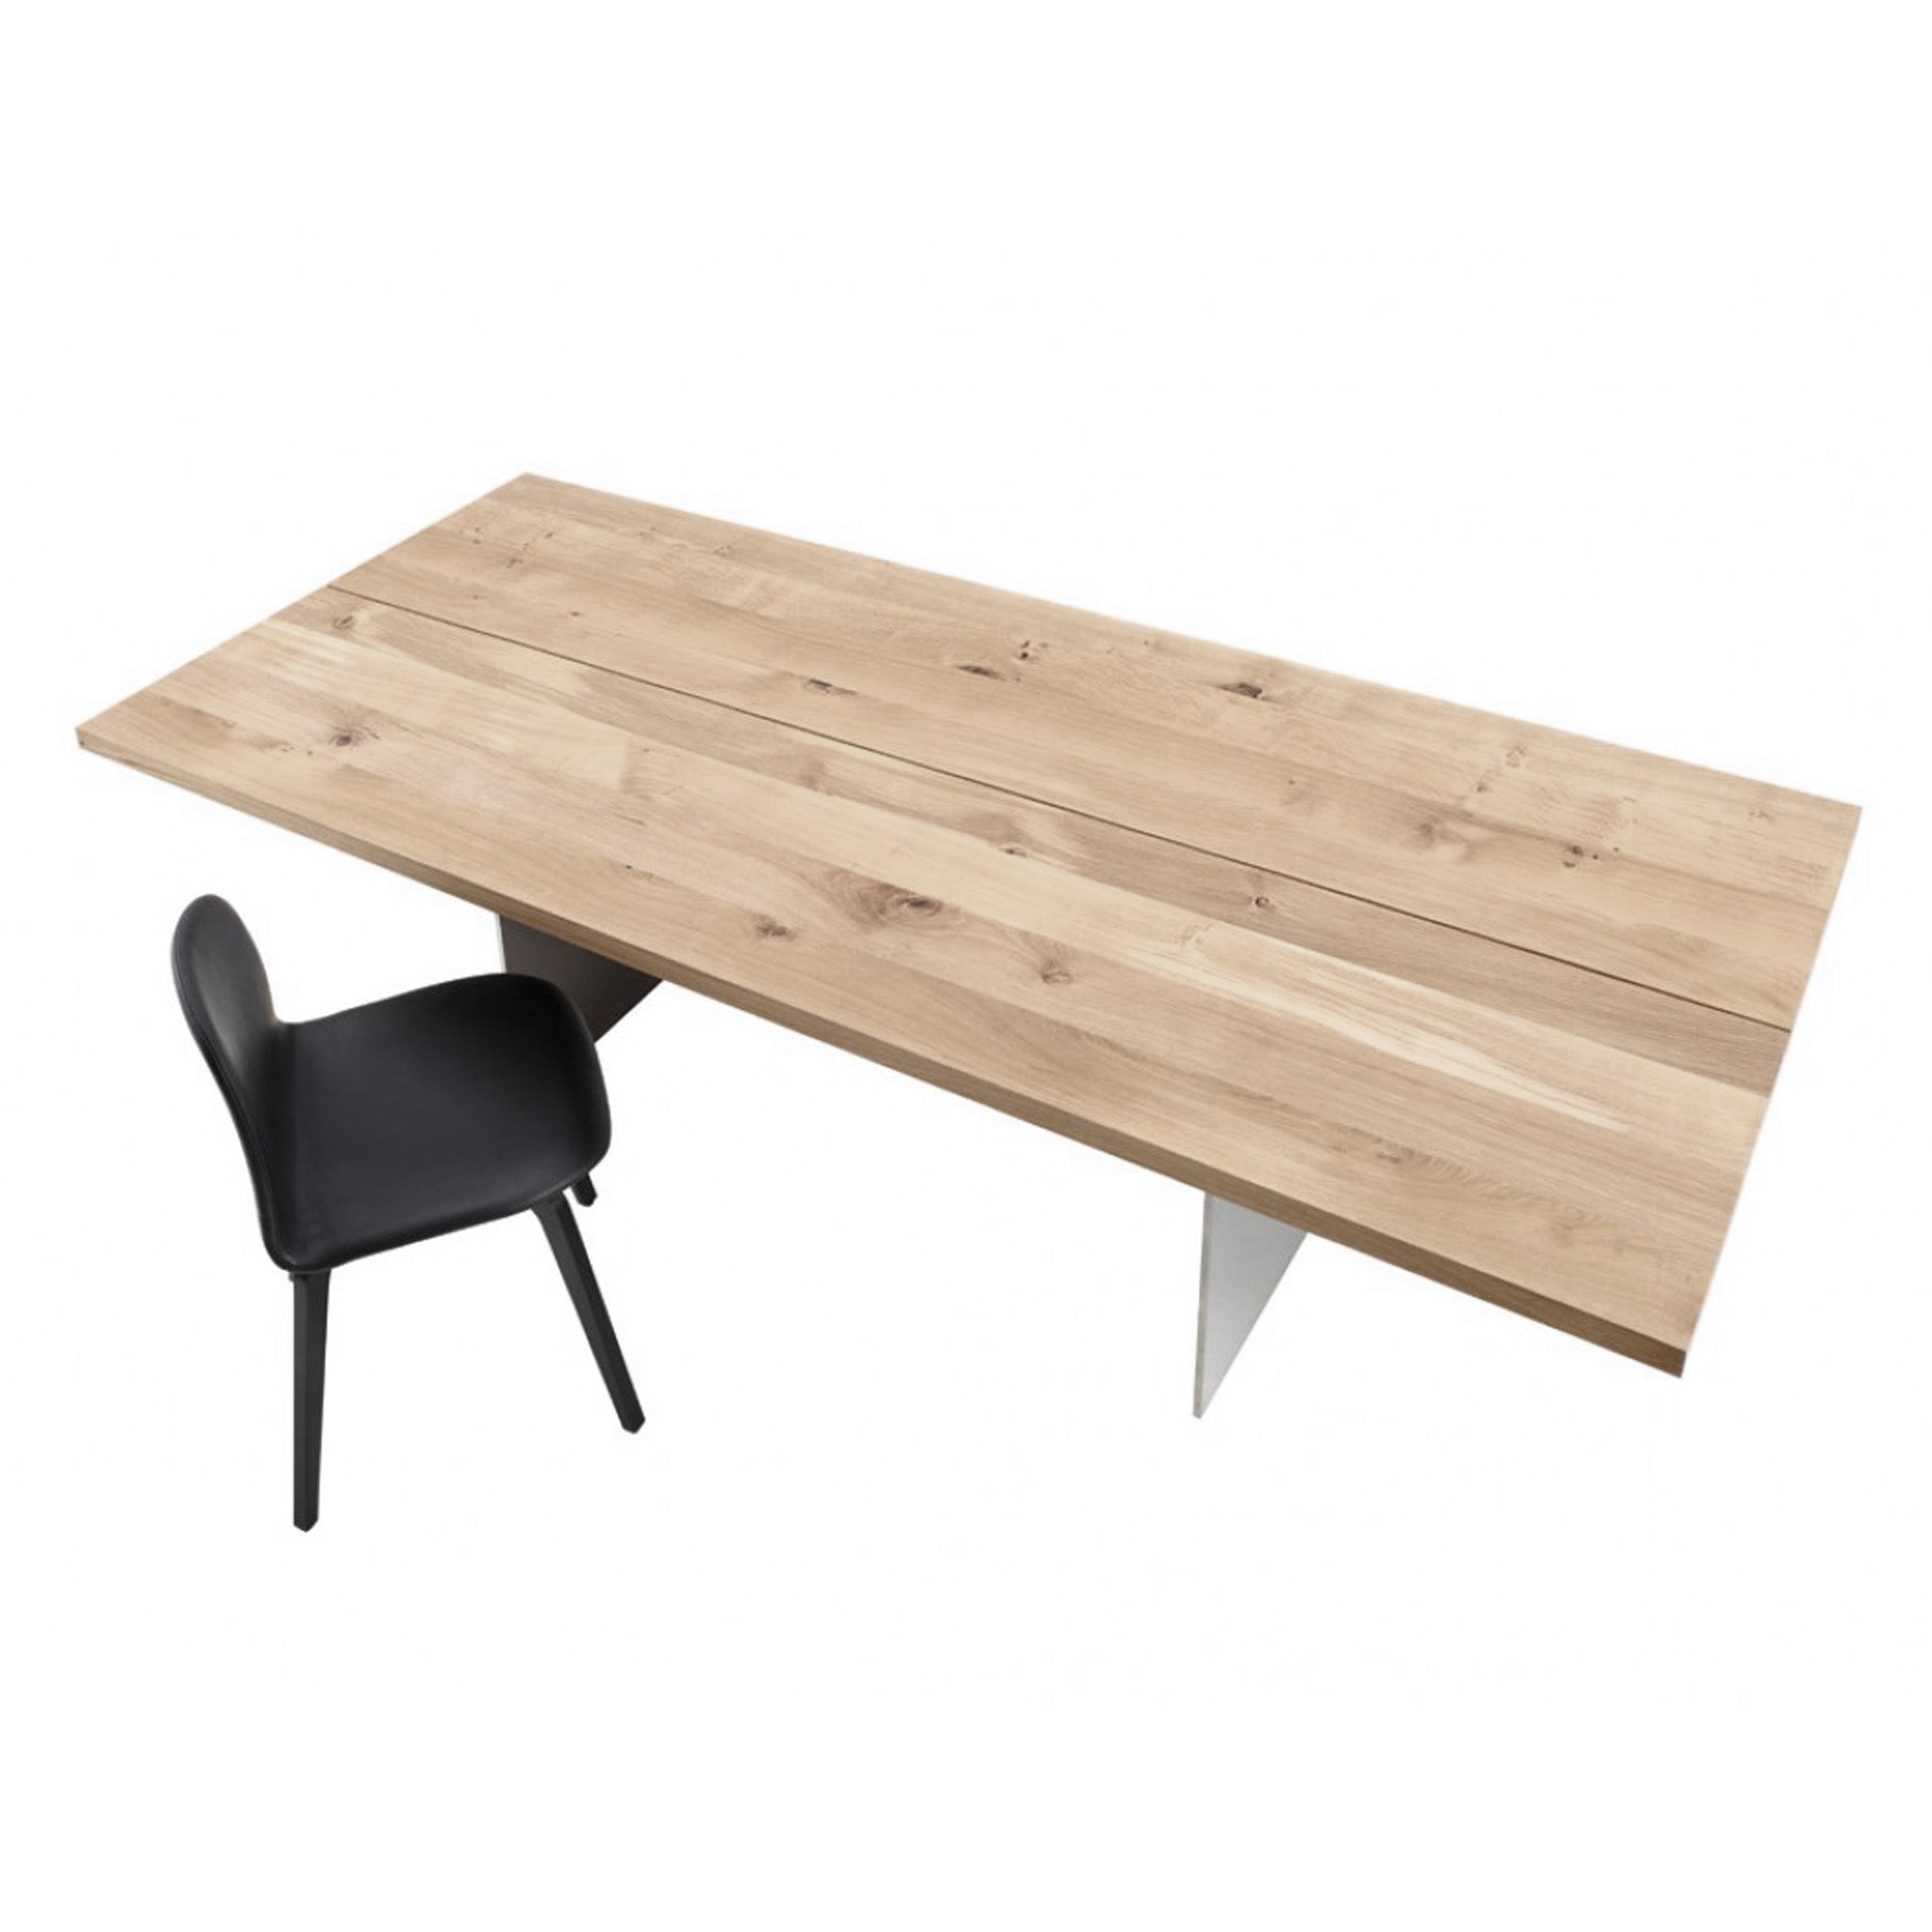 DK3 #3 Table by Jacob Plejdrup for DK3